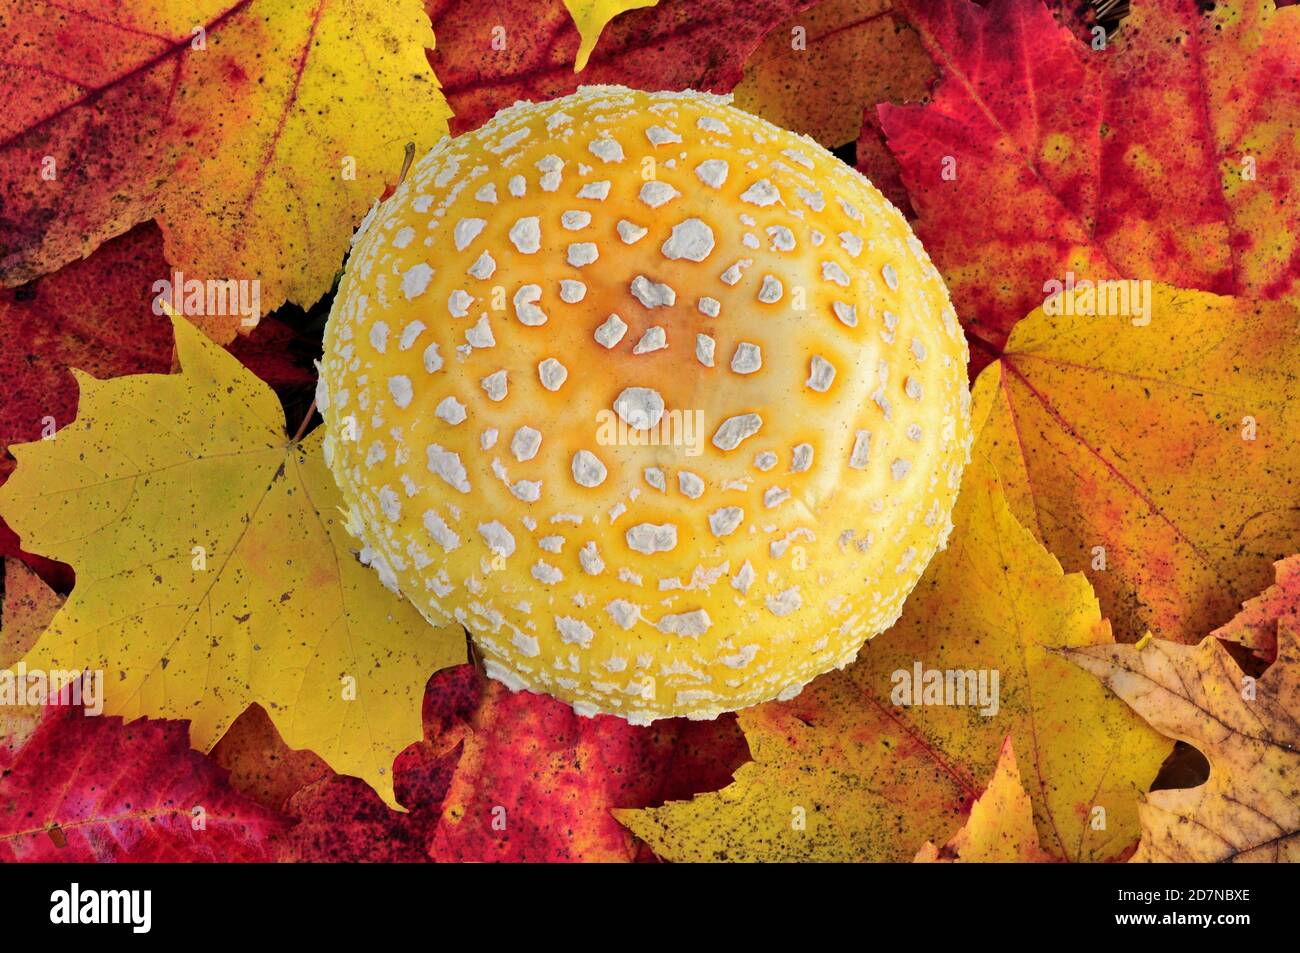 Closeup of colorful autumn maple leaves surrounding a yellow-orange American Fly Agaric mushroom cap (Amanita muscaria) with white warts or patches. Stock Photo